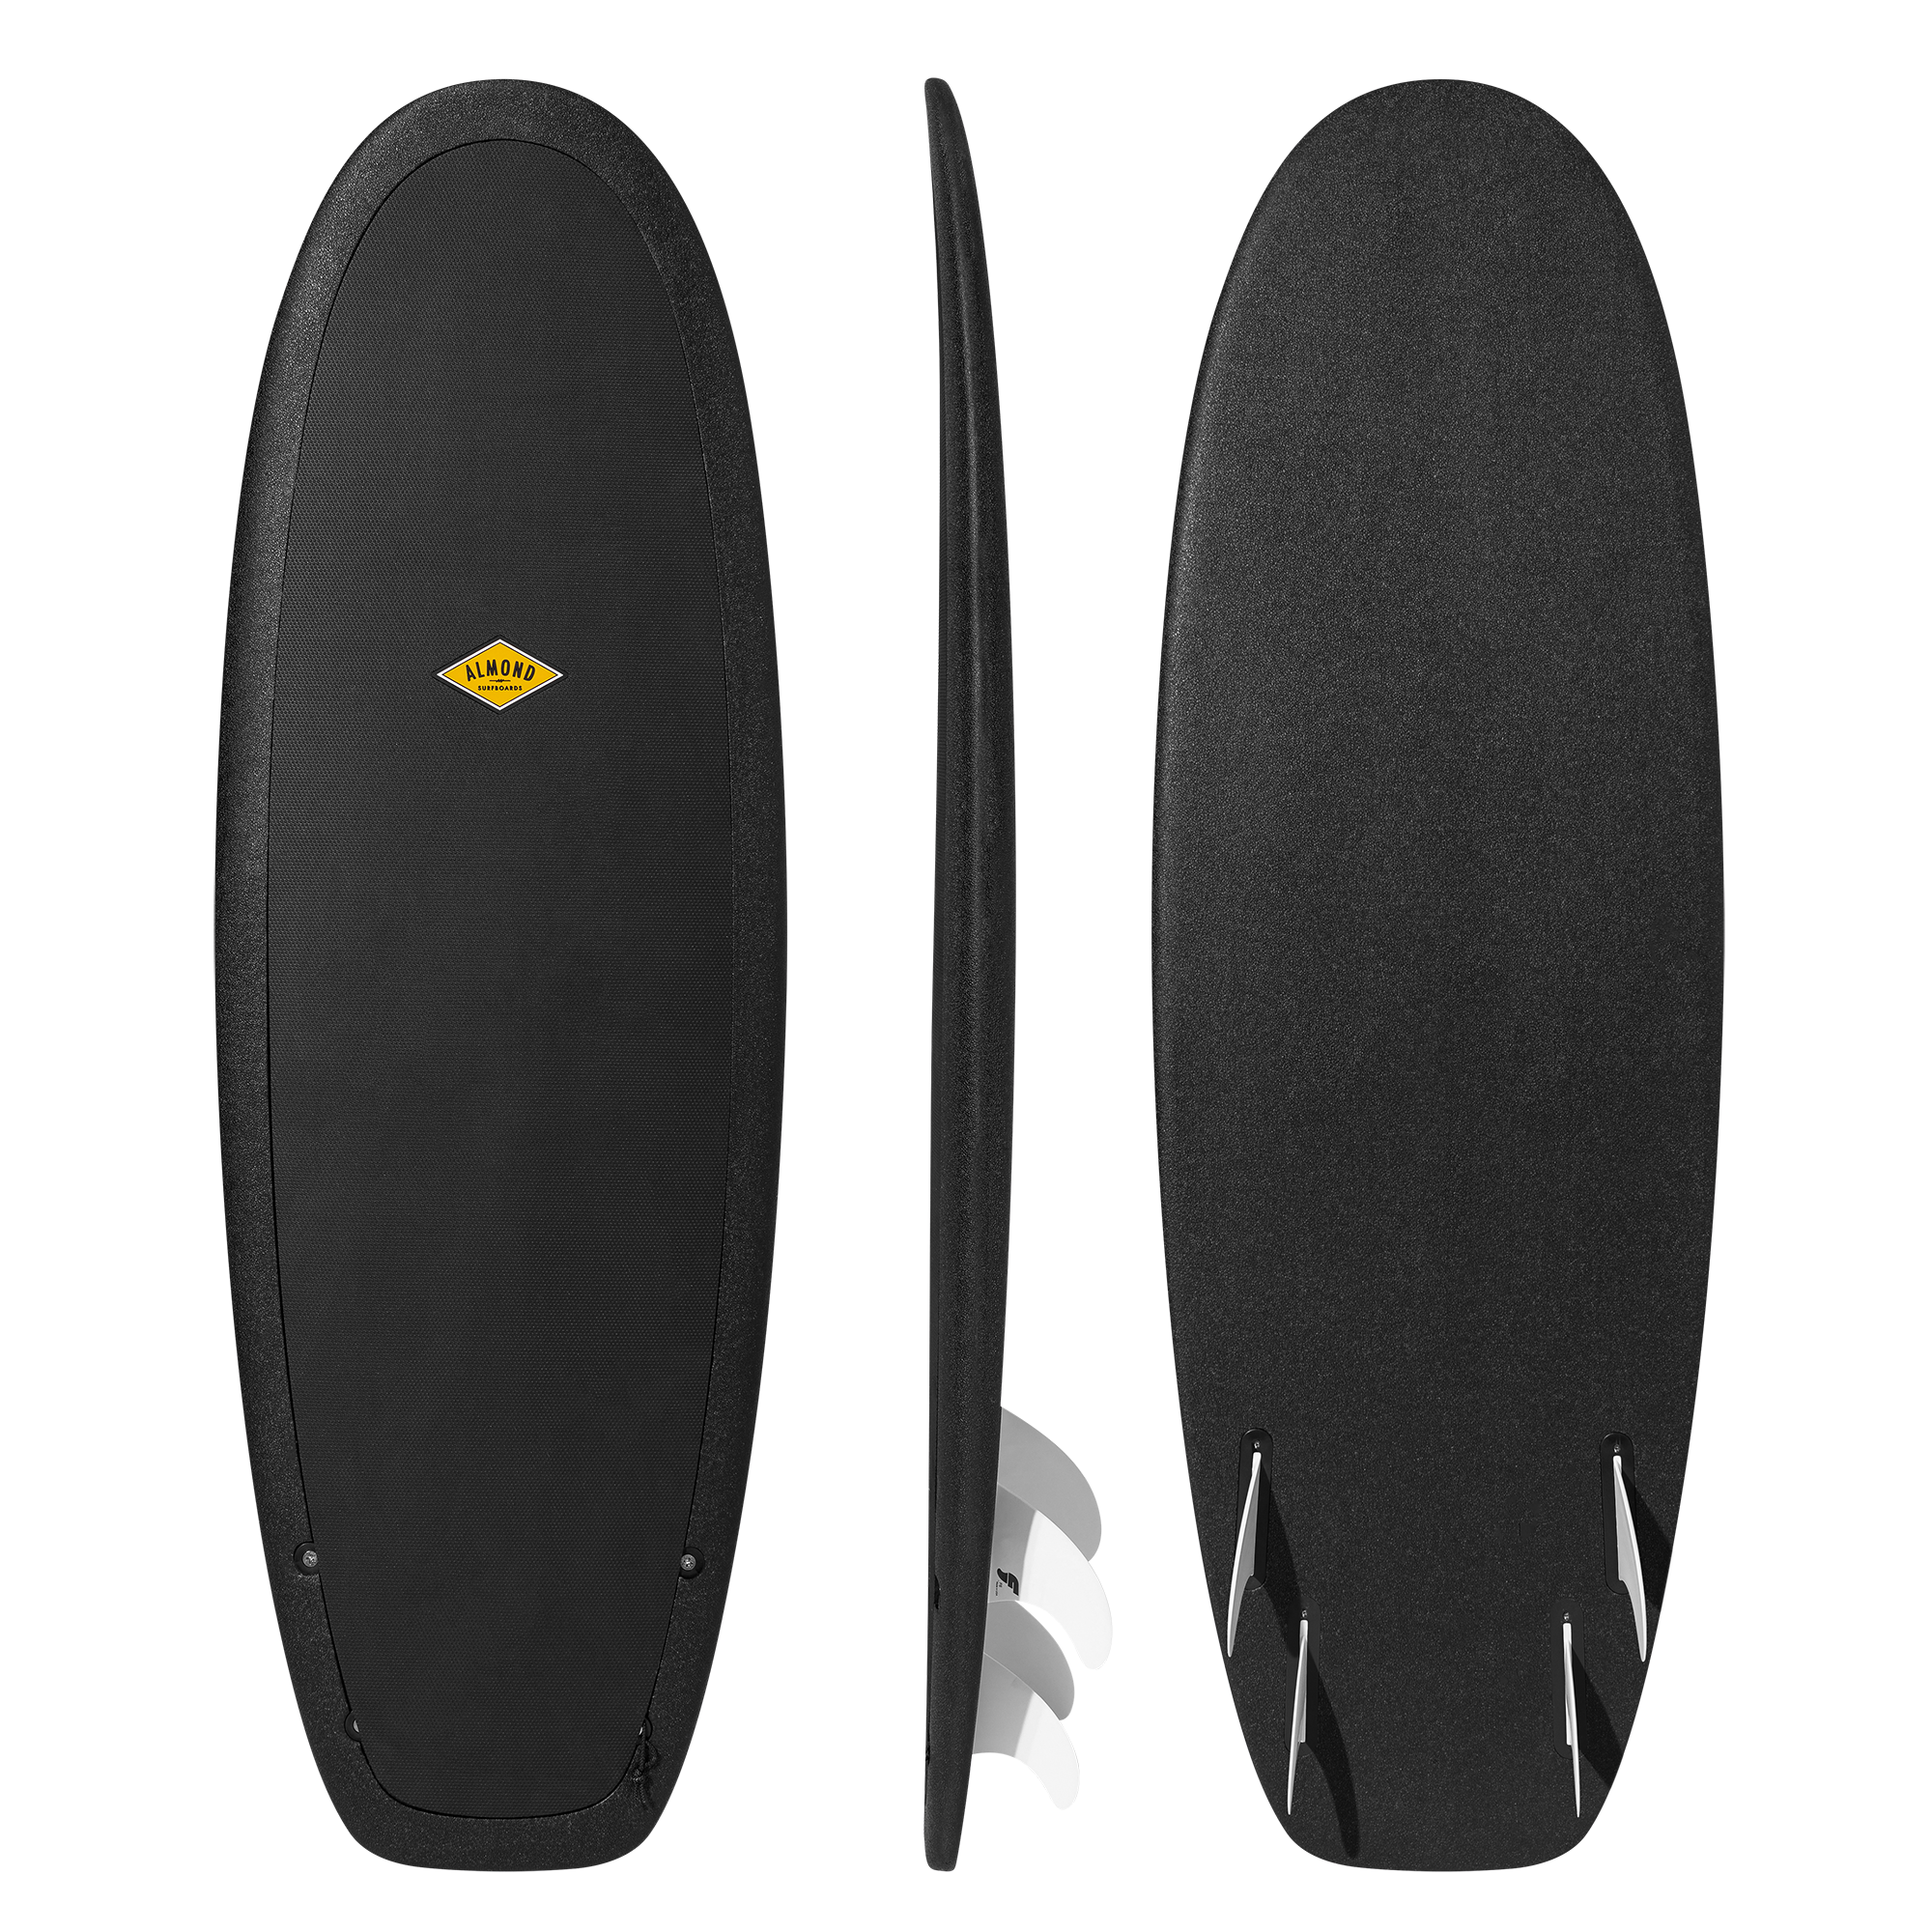 Front, Profile and back of a black 5 foot 4 inch Almond Secret Menu surfboard with a logo on a transparent background